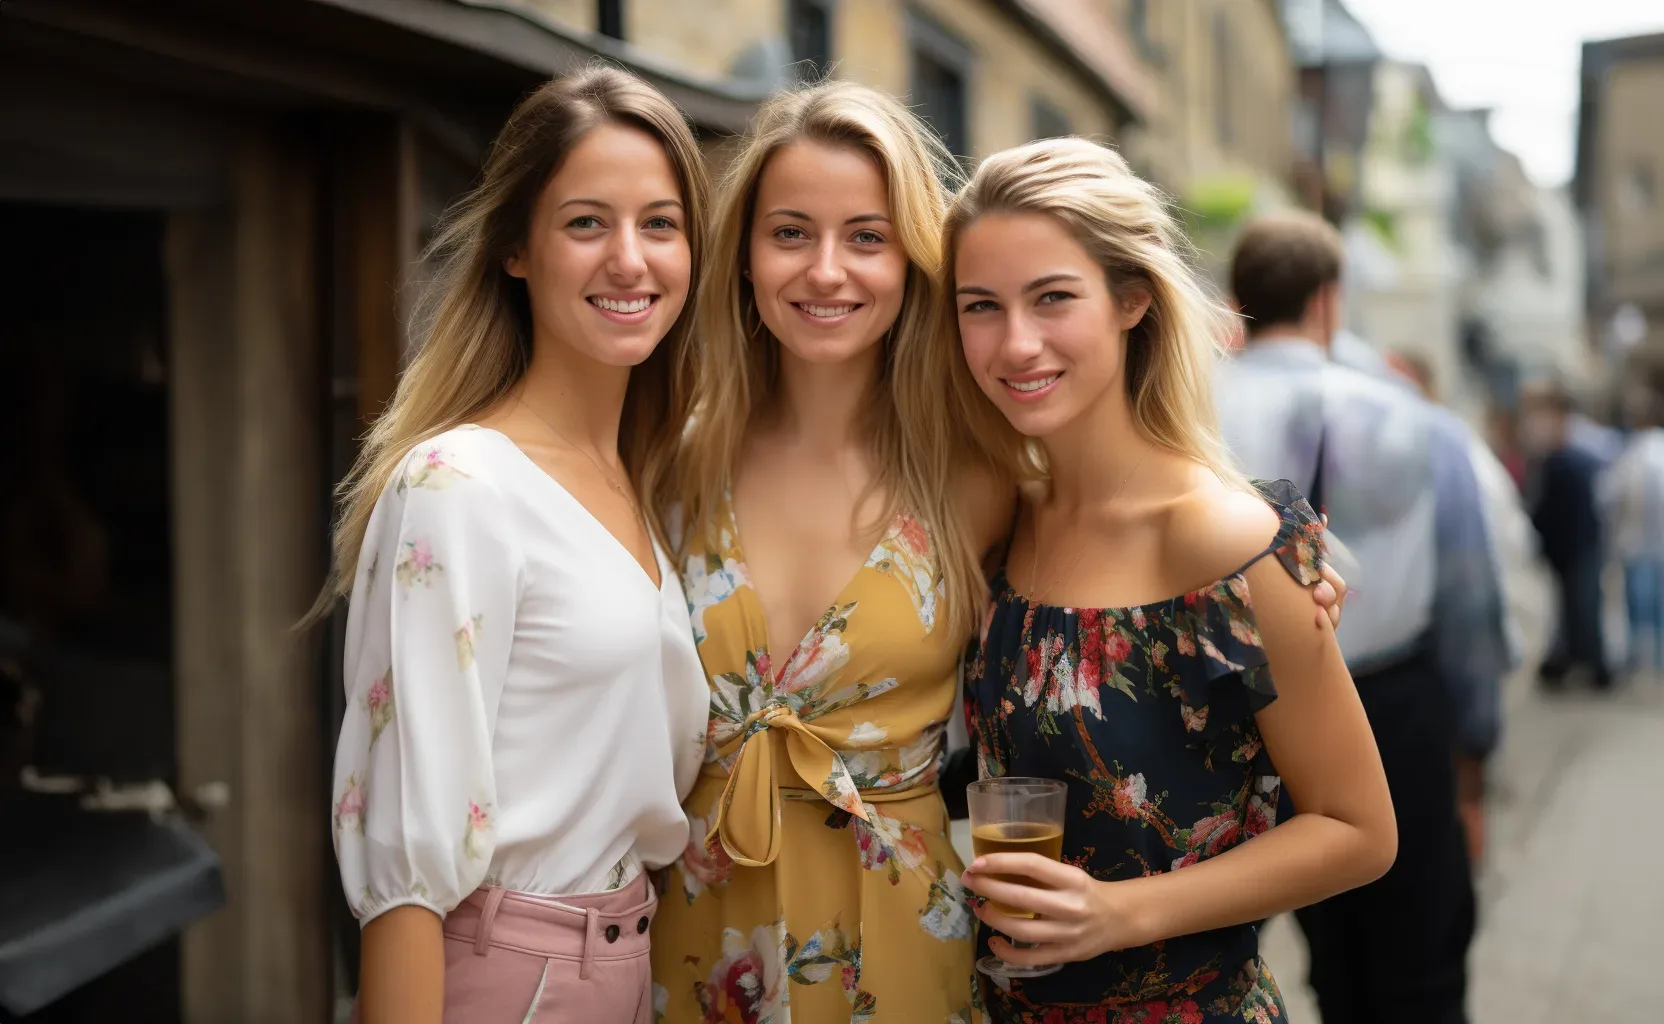 Three young women posing for a photo on a street.